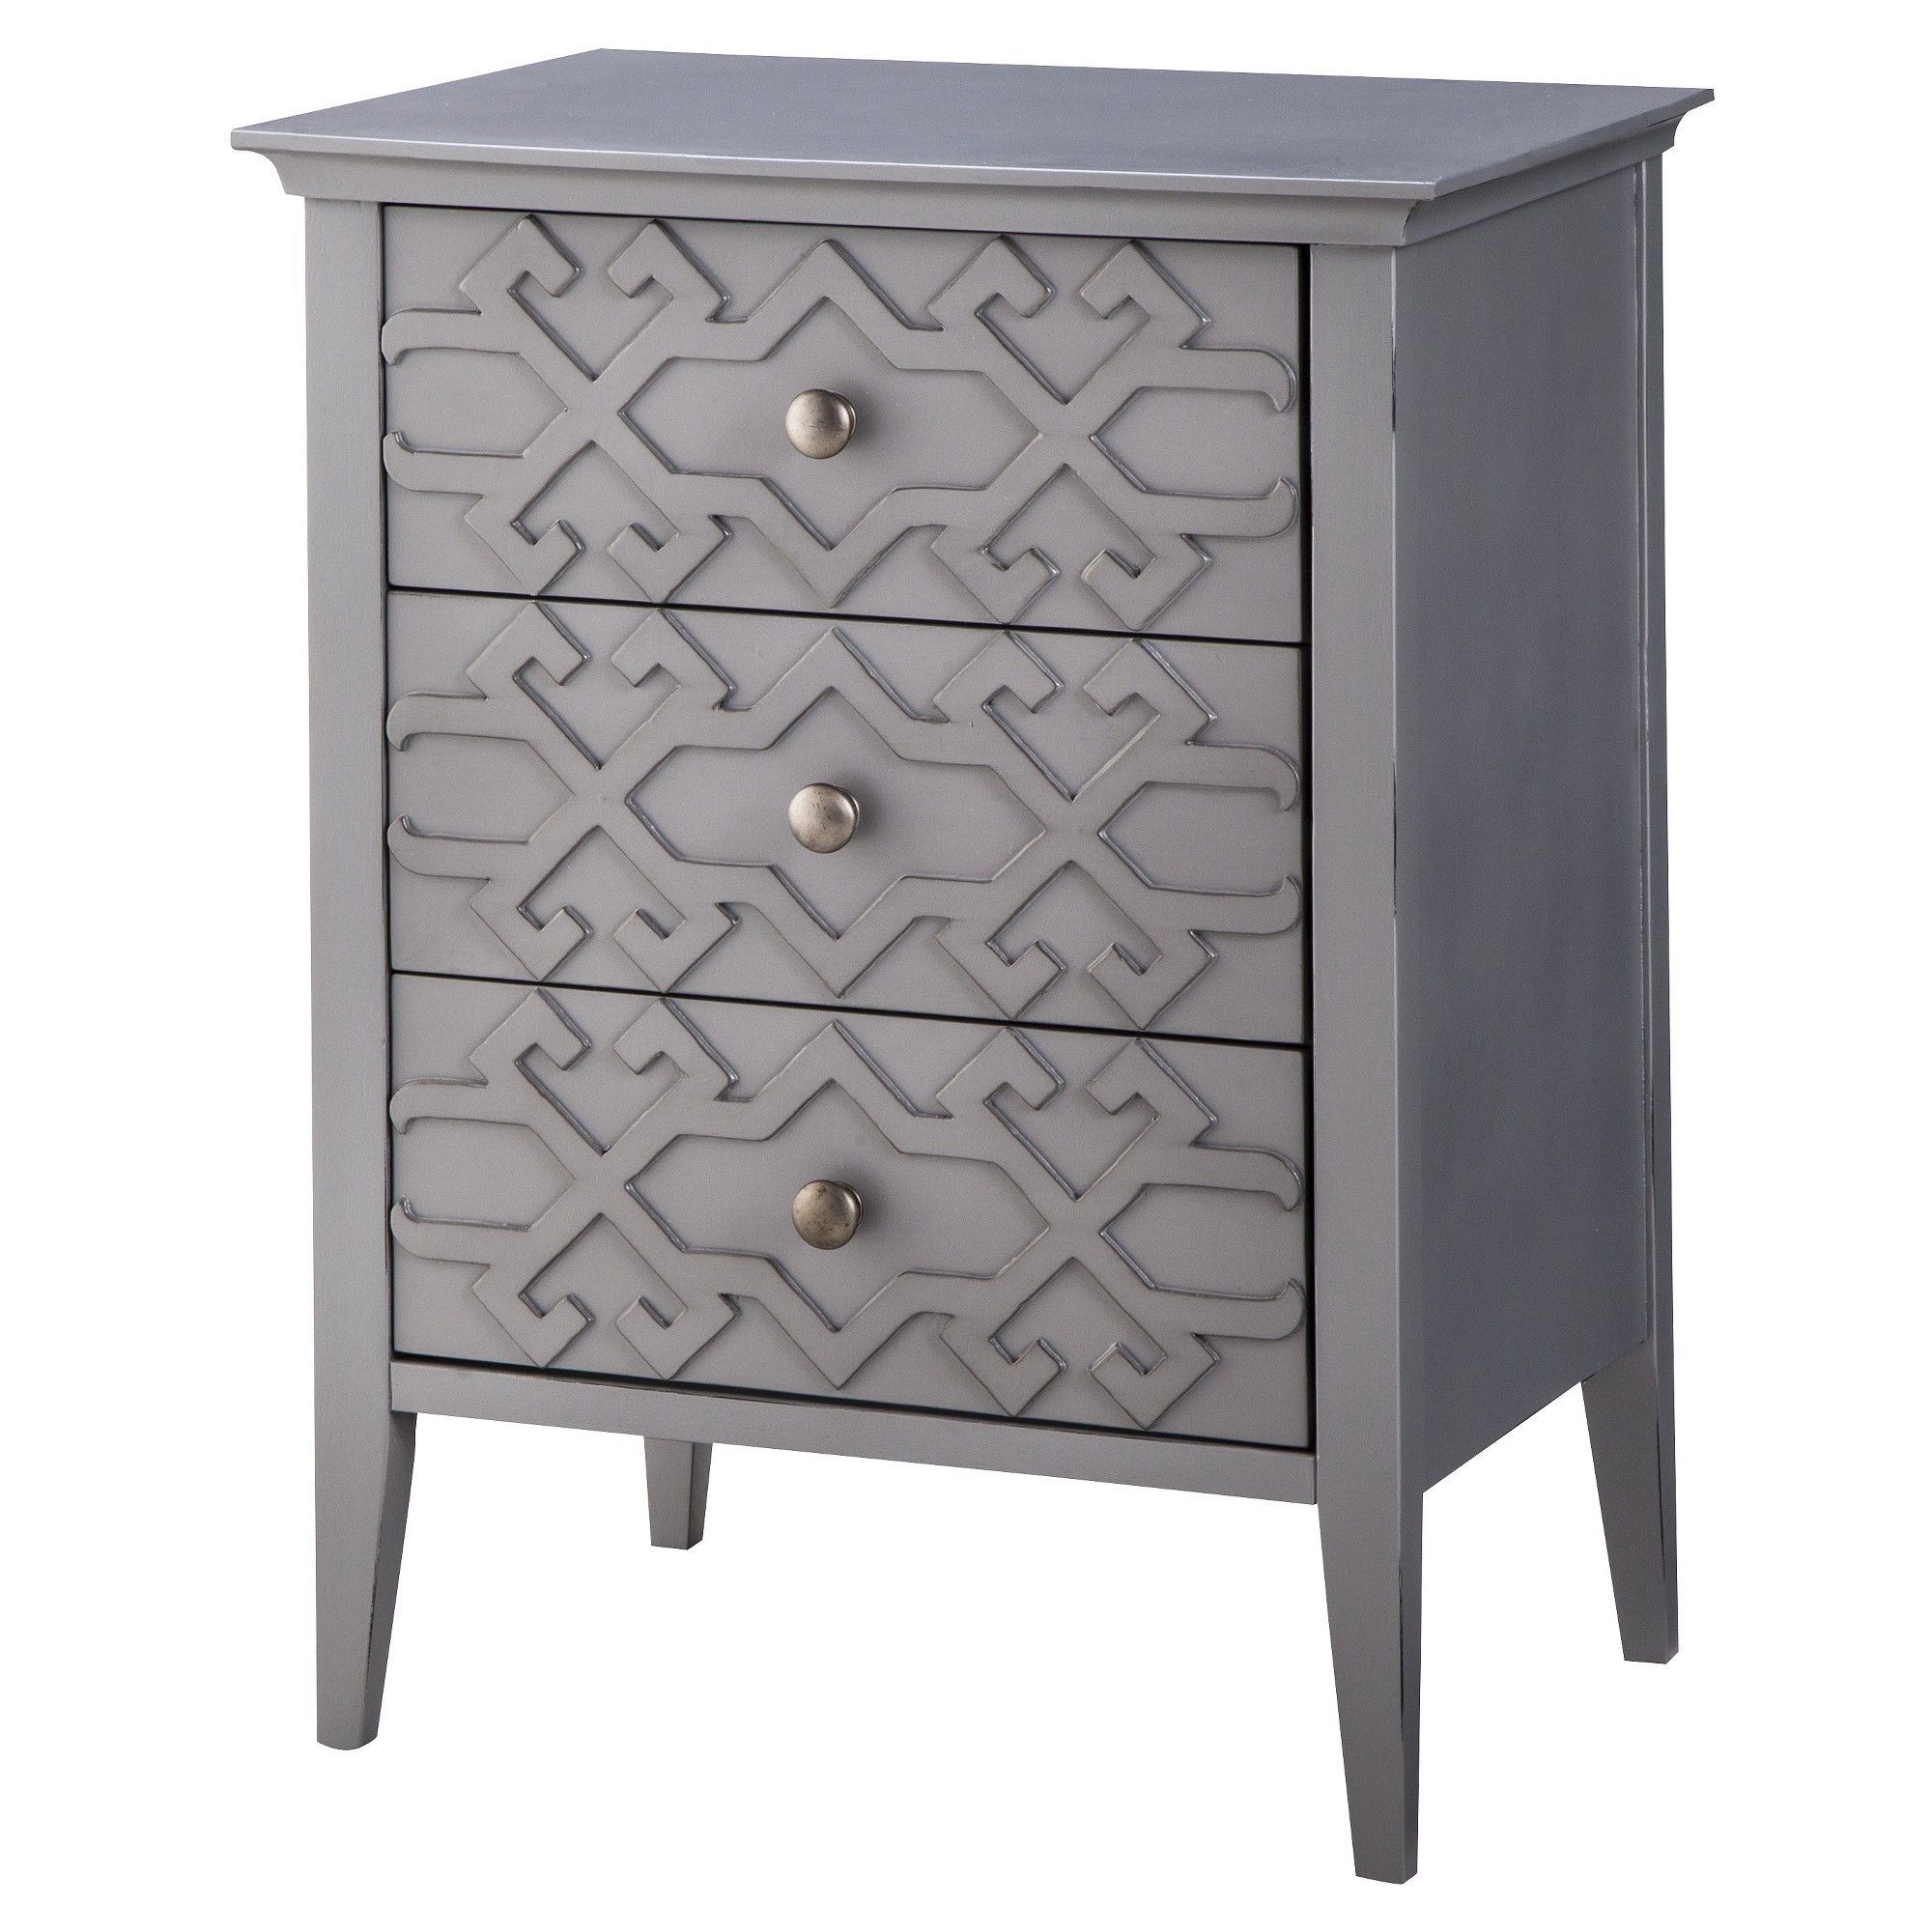 fretwork accent table threshold gray products storage antique wood side metal carpet small cordless lamps high coffee tall white bookcase skinny console ikea patio end black retro